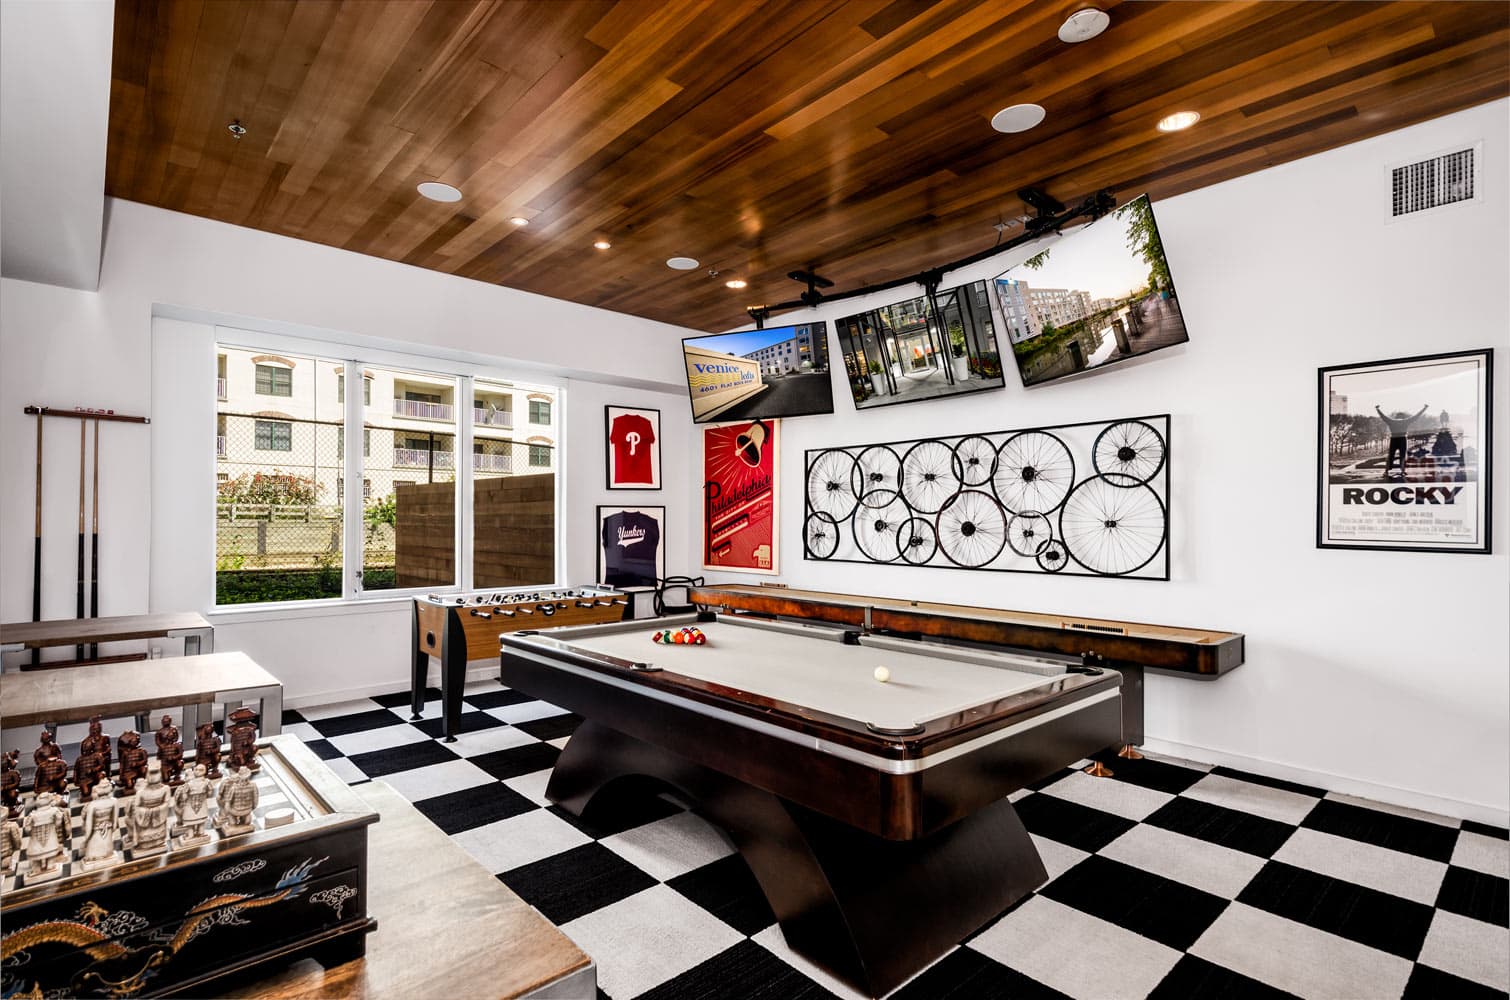 Game Room with billiards table and shuffle board